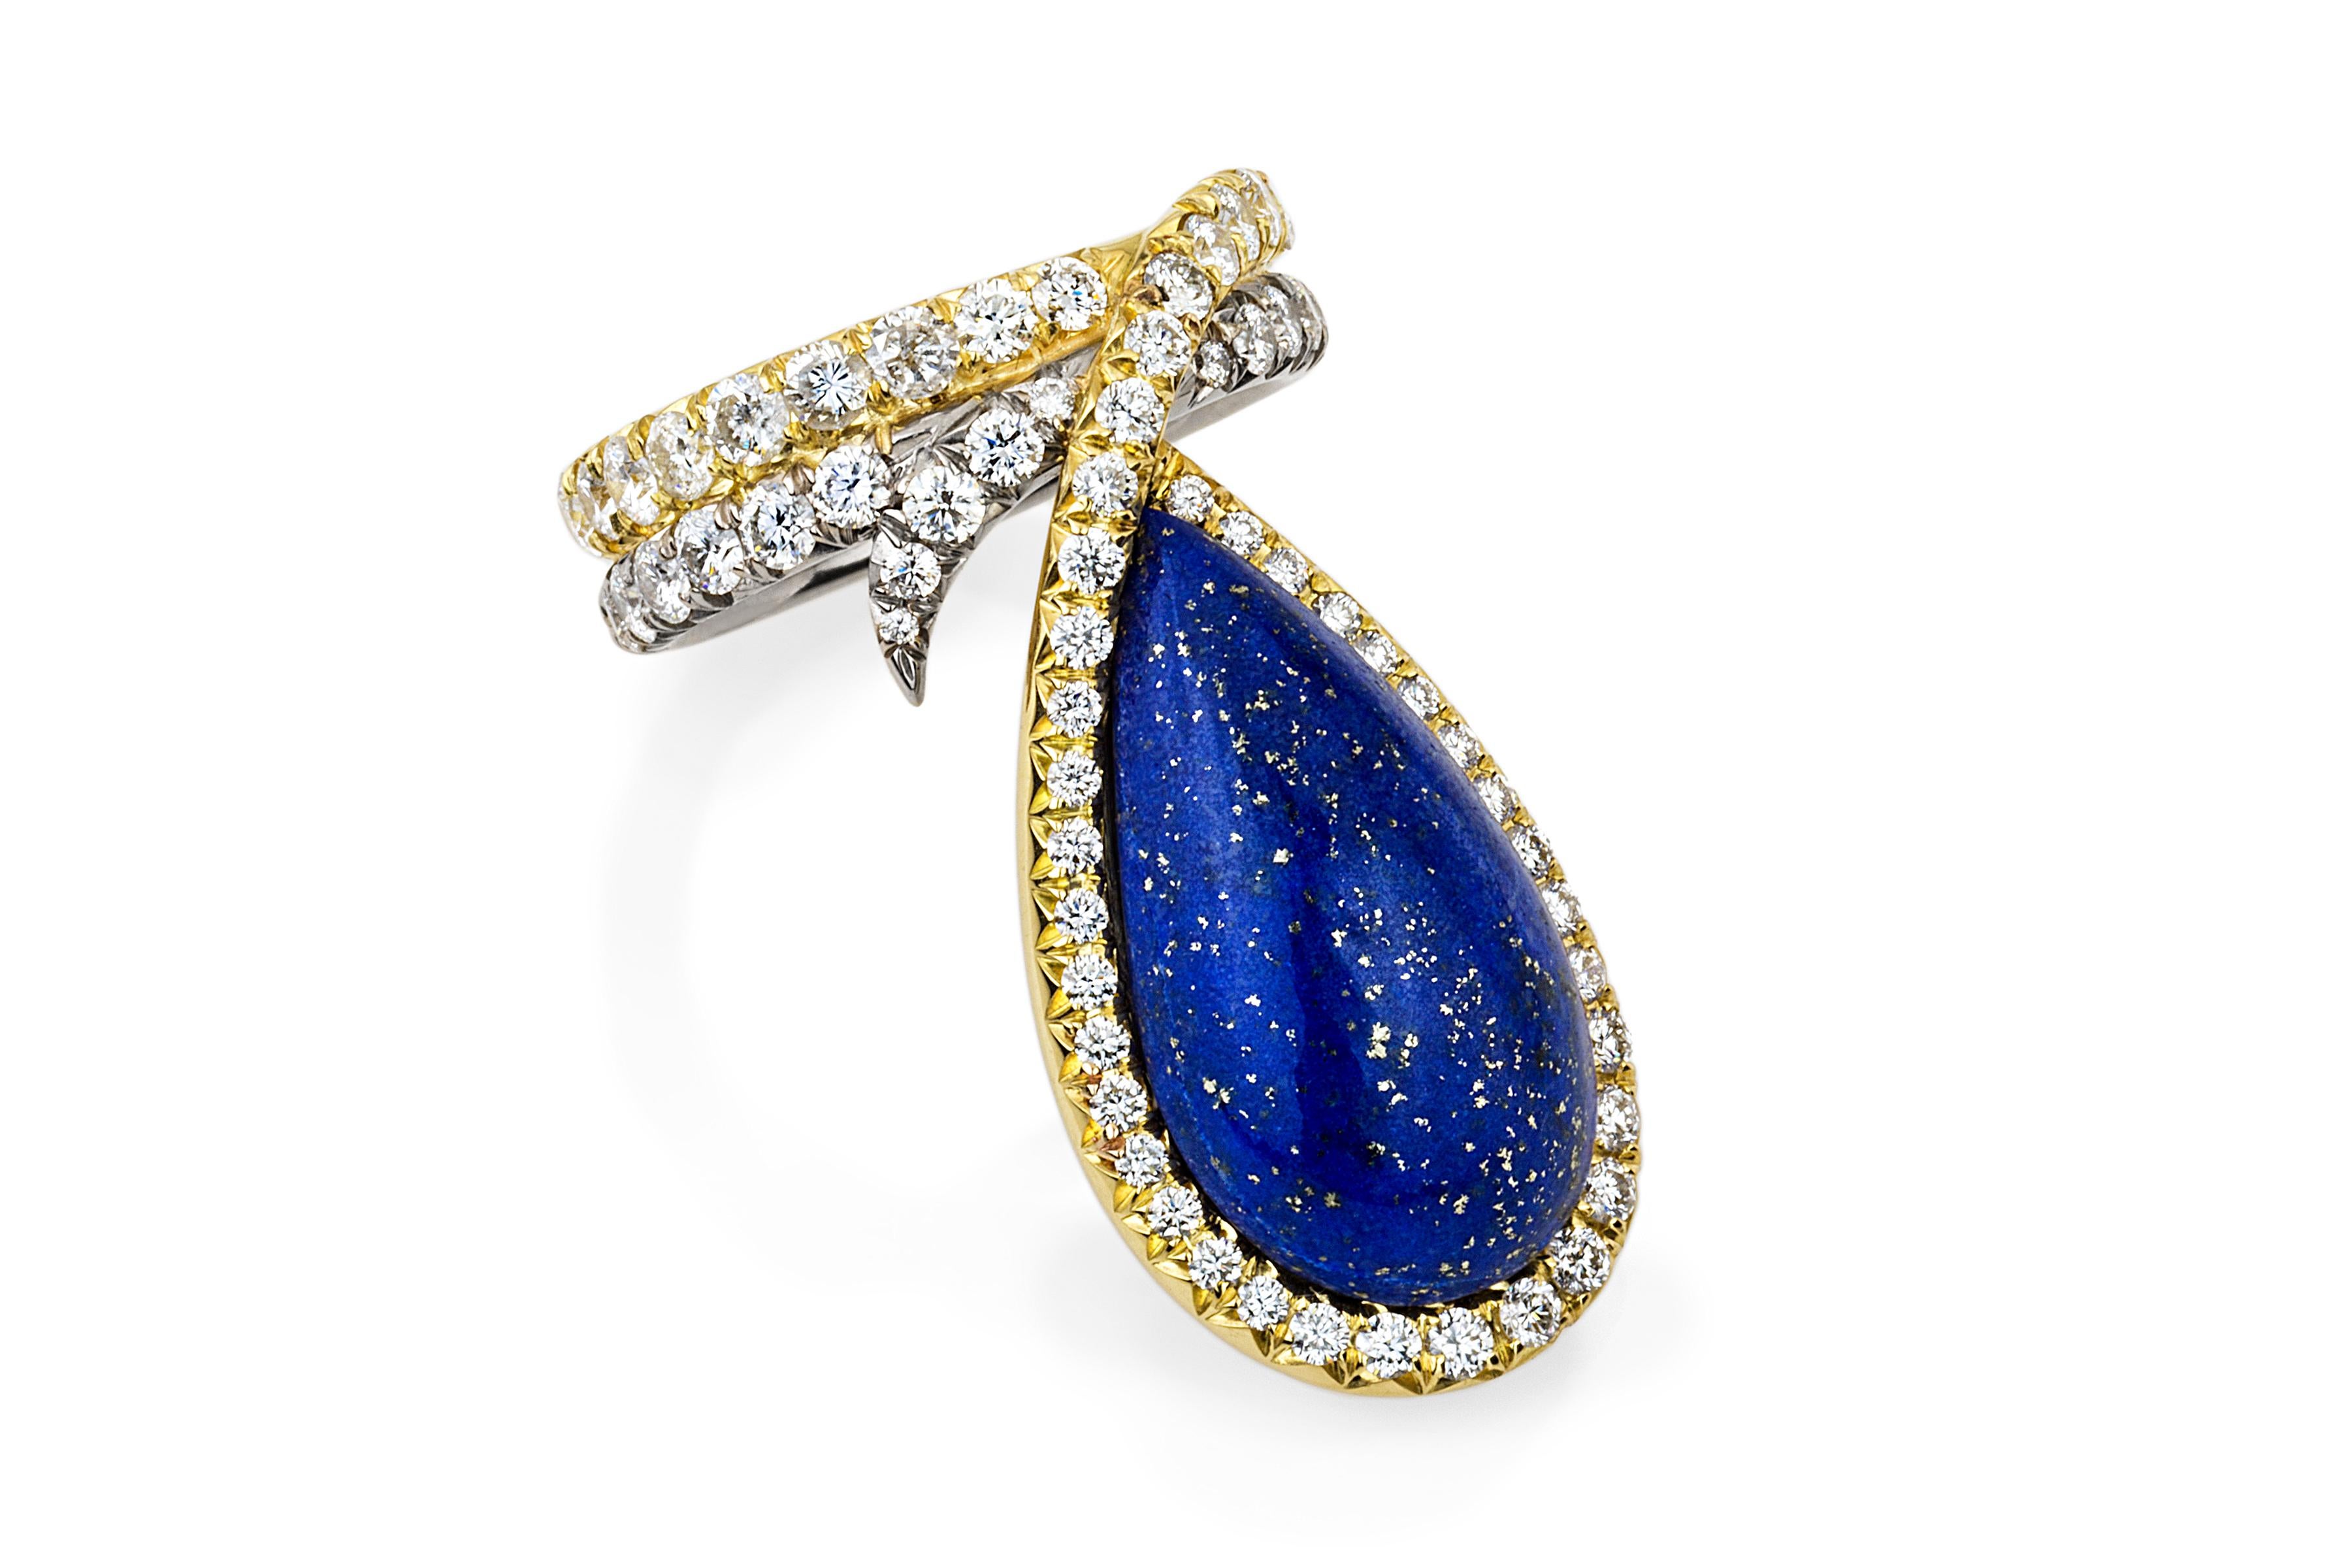 A one-of-a-kind piece inspired by the simple elegance of the blue and gold flakes embedded in the vintage Lapis Lazuli gem. A ribbon of sparkly diamonds set in 18k white and yellow gold gently follows the curve of the Lapis and the wearer's finger